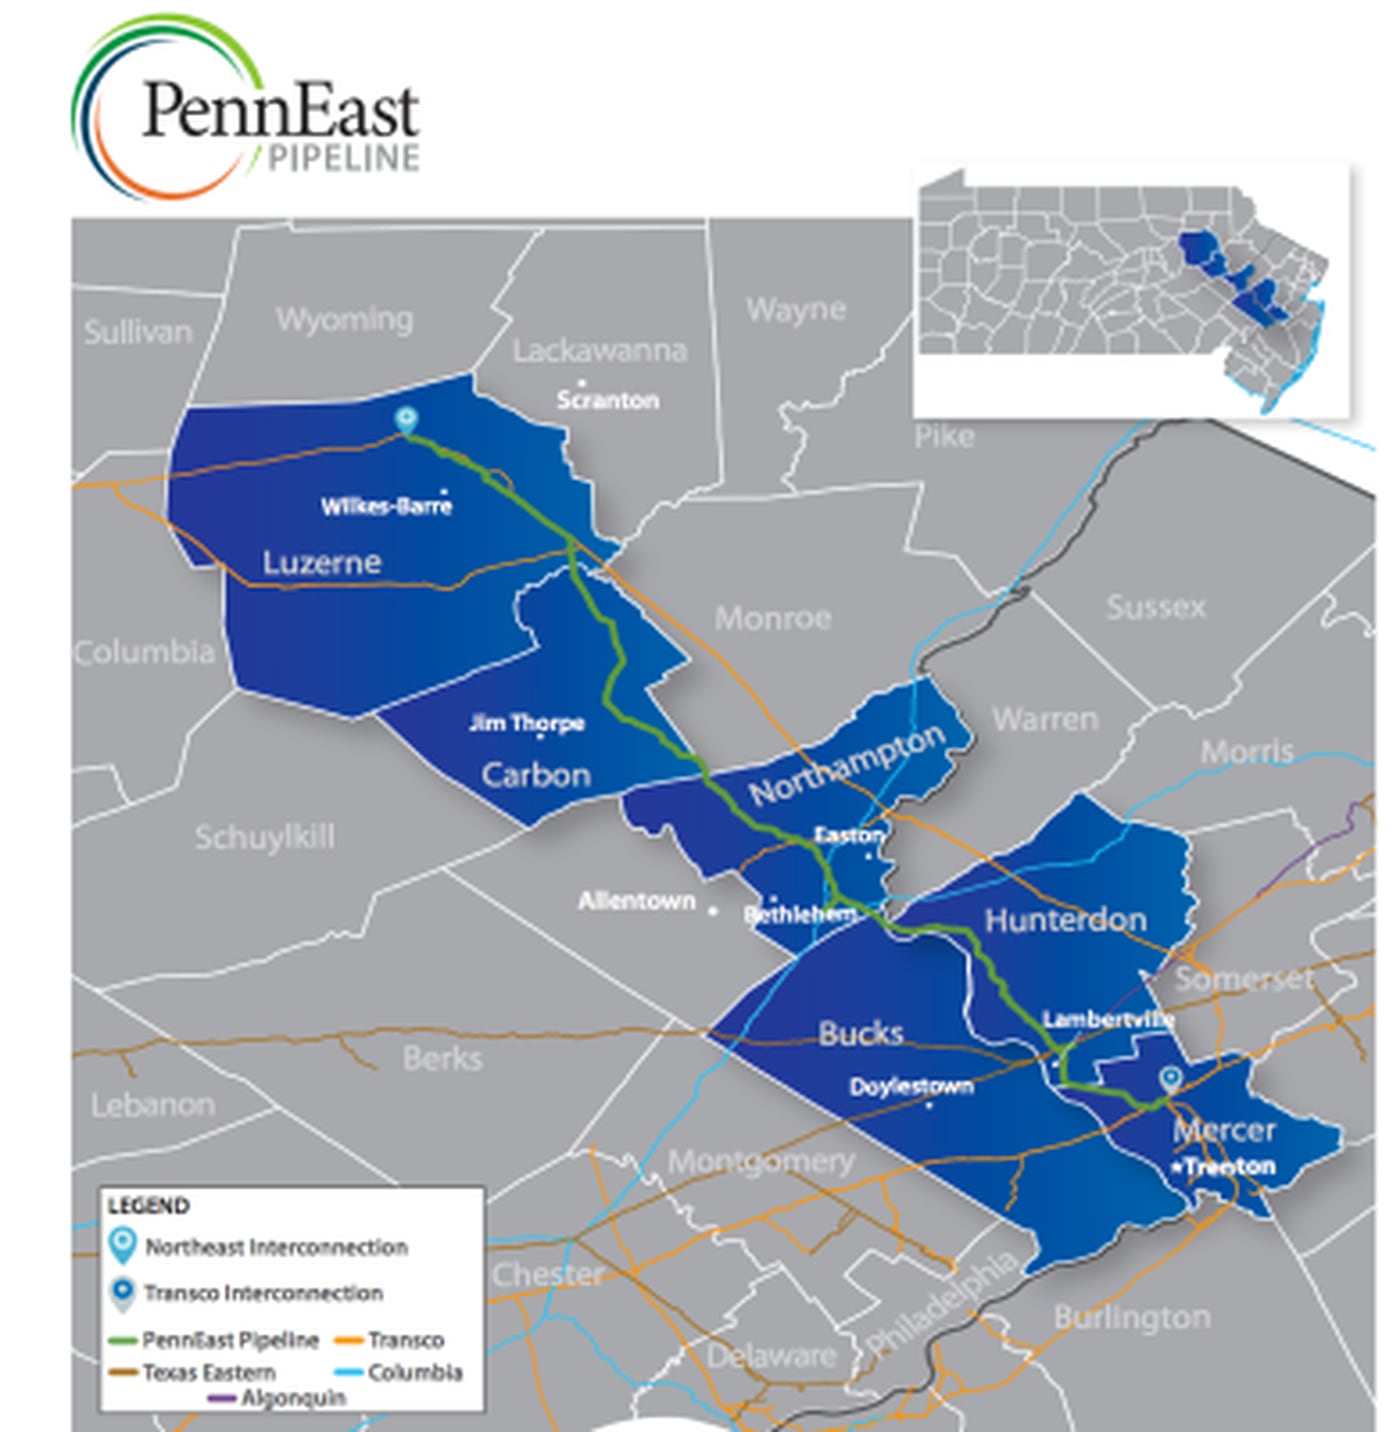 The PennEast Pipeline would deliver 1 billion cubic feet of Marcellus Shale natural gas from Pennsylvania to a pipeline interconnection near Trenton. (PENNEAST PIPELINE CO.)